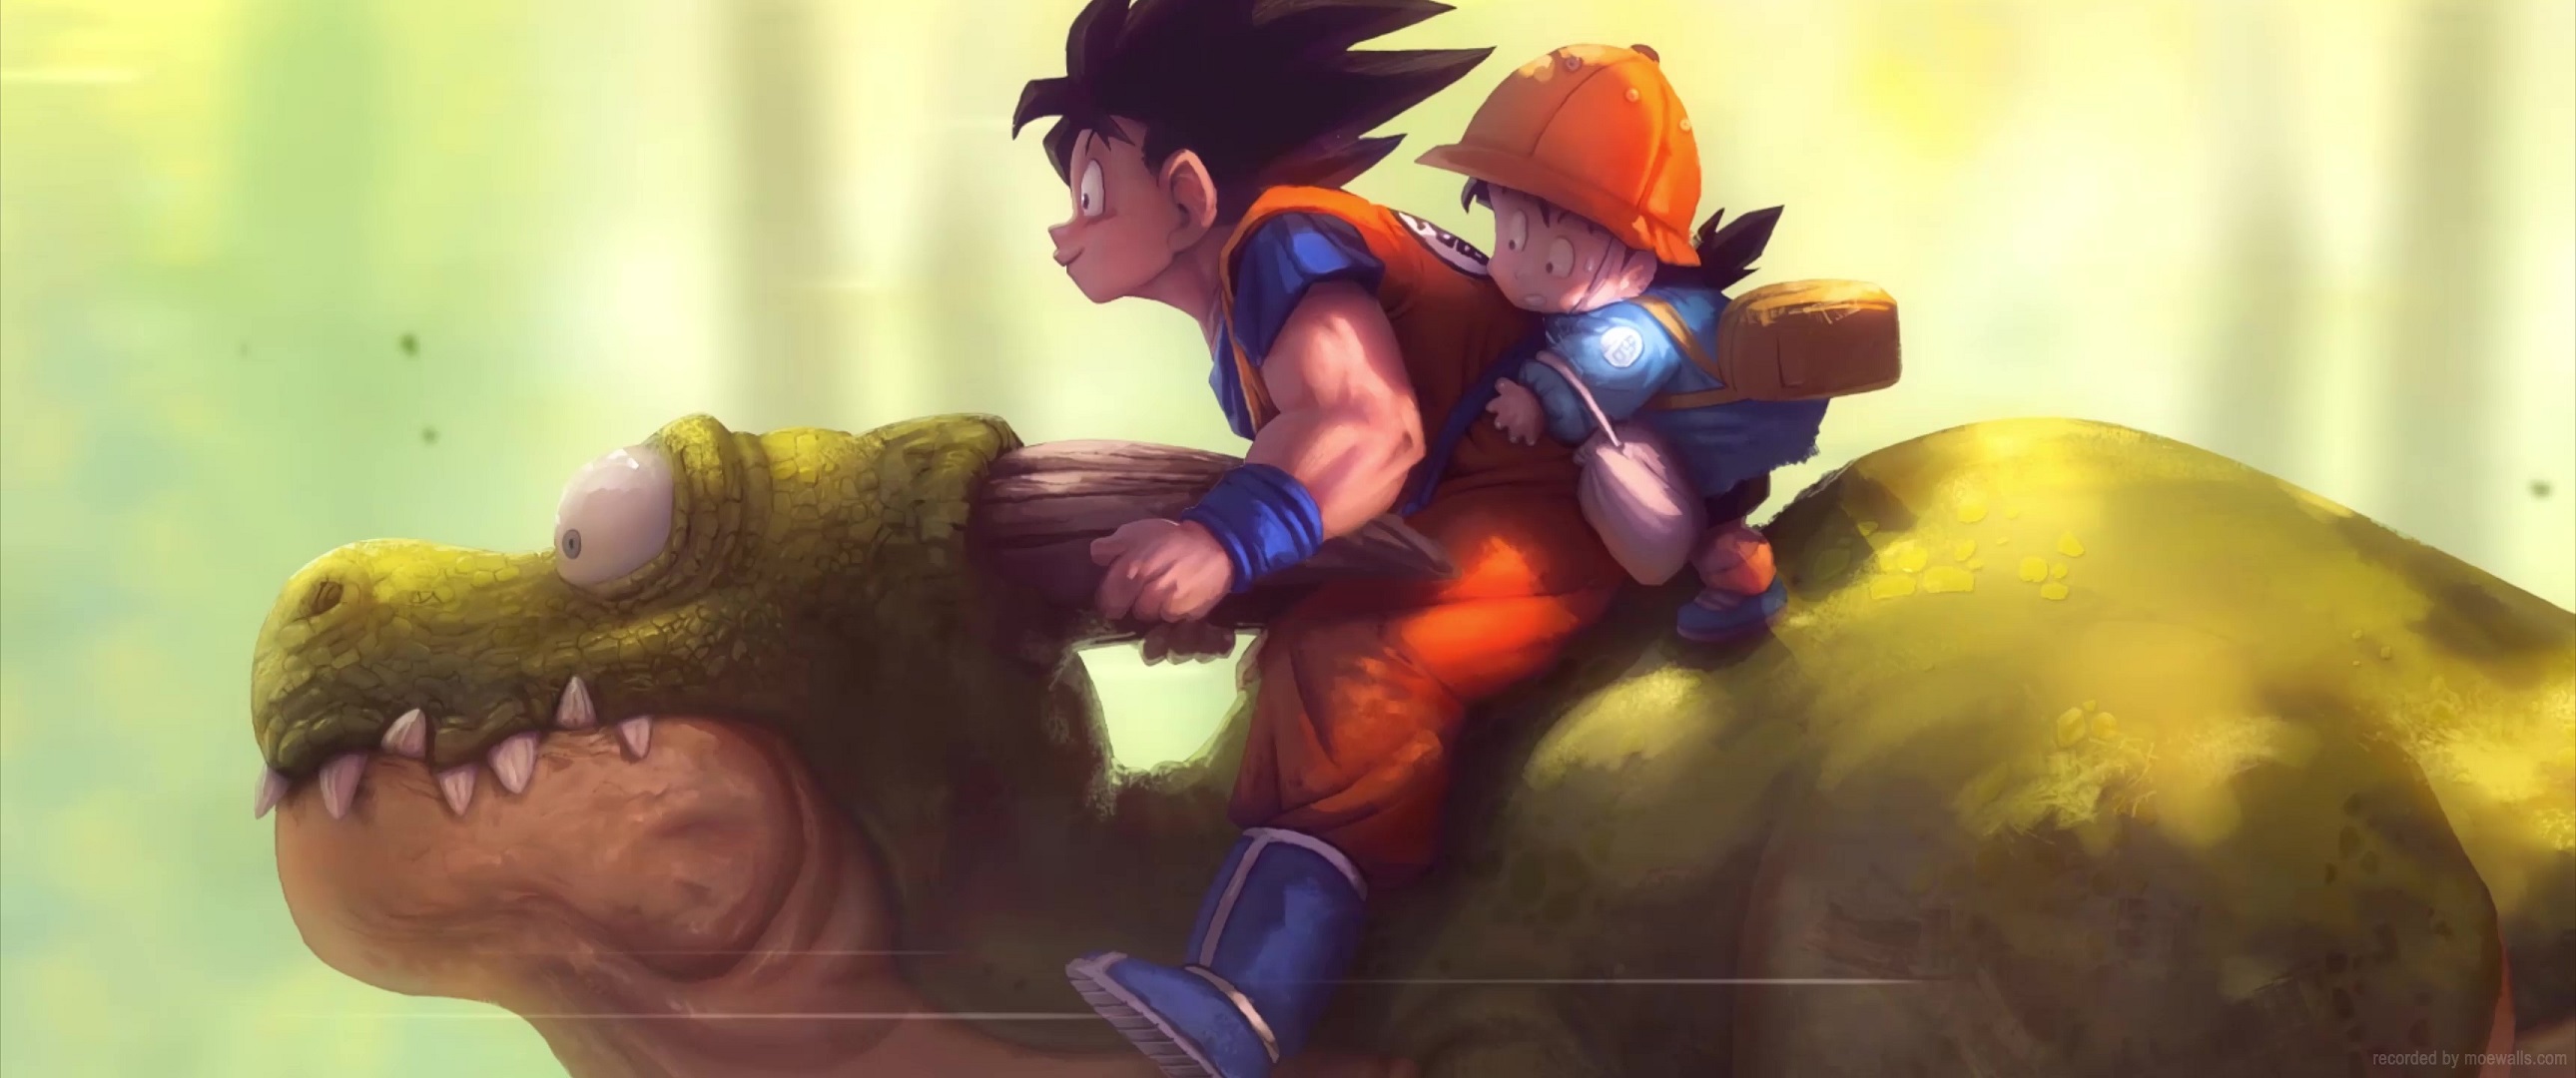 3 Son Gohan Live Wallpapers, Animated Wallpapers - MoeWalls